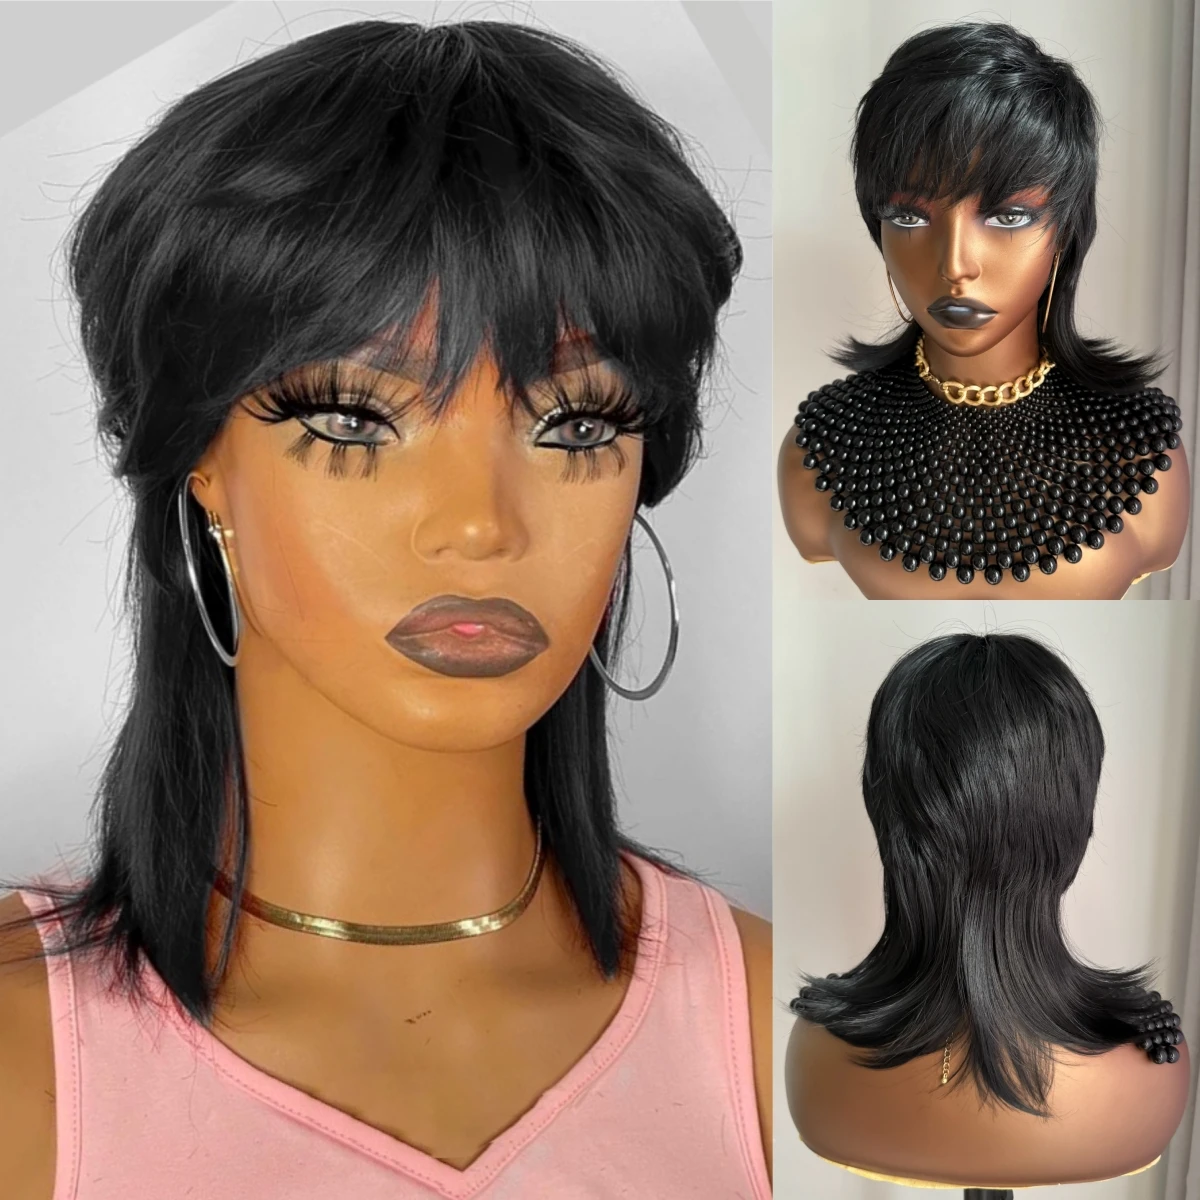 WIGERA Synthetic Short Pixie Cut Wigs On Sale Shaggy Layered 80s Mullet Wig Short Straight Bob Wigs With Bangs Machine For Women